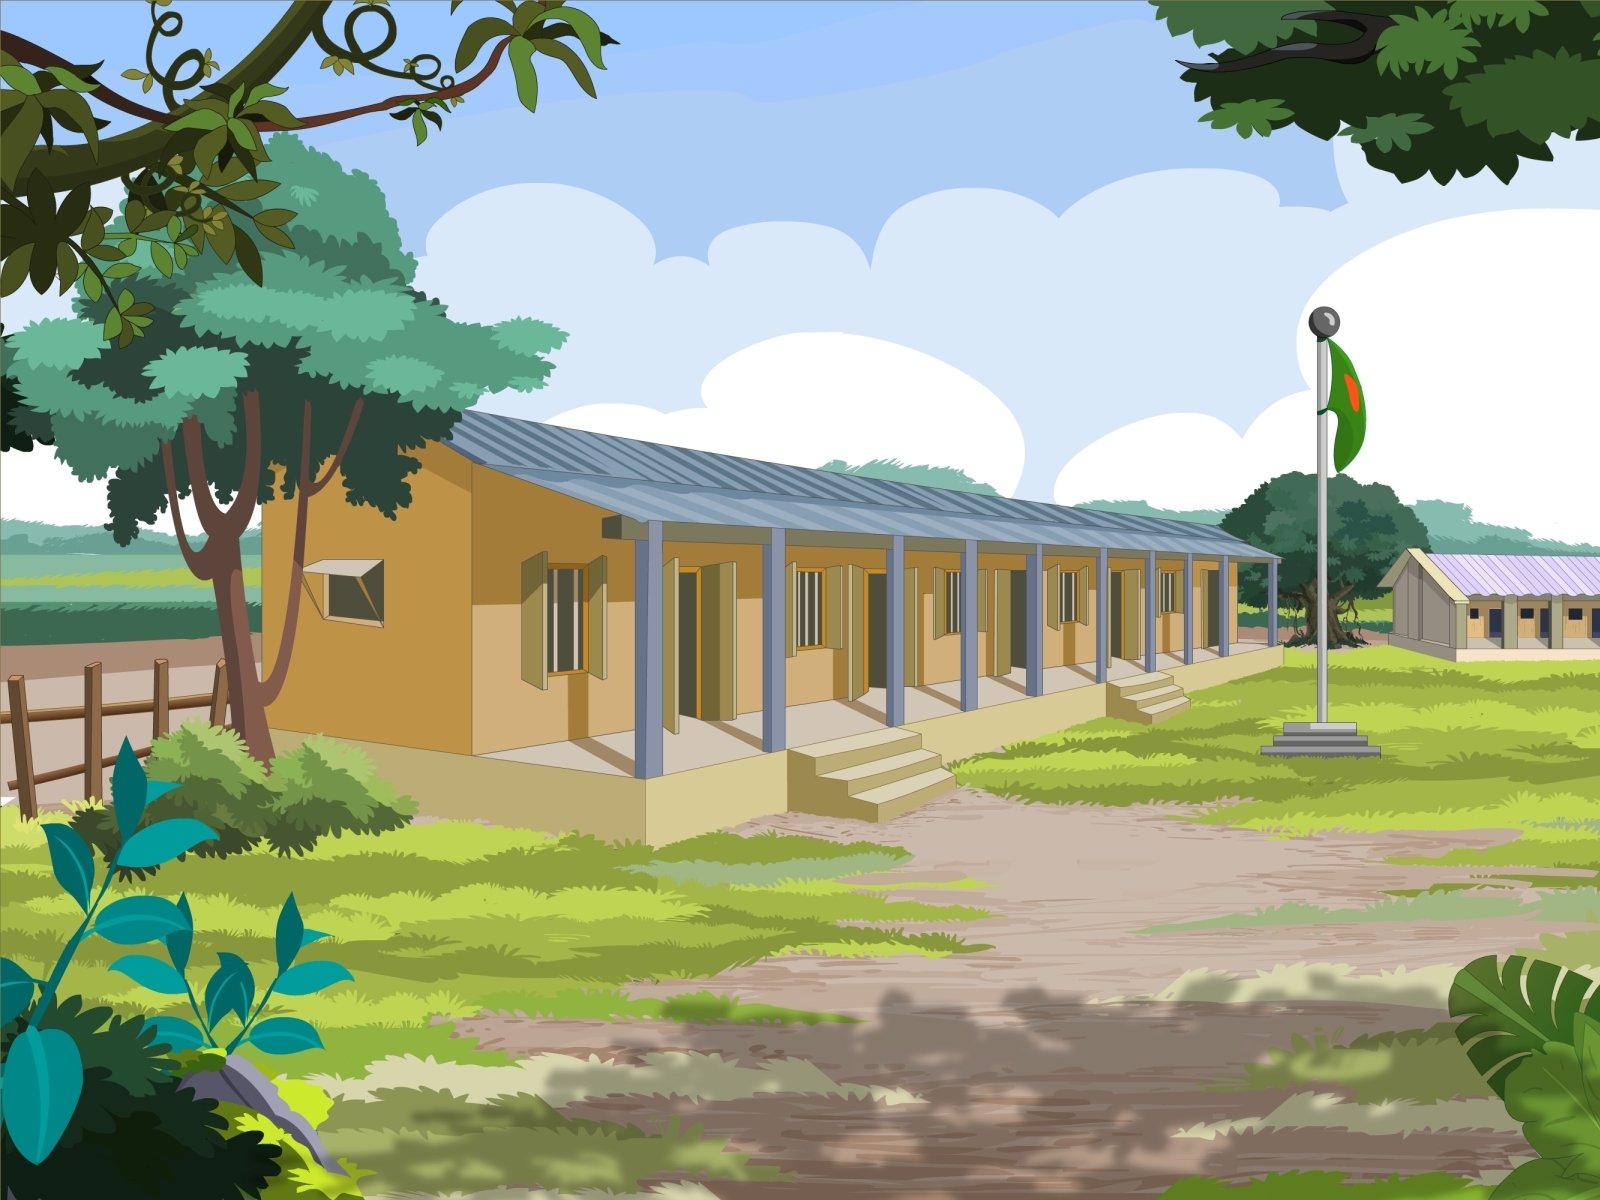 village-school-by-kawshick-biswas-on-dribbble